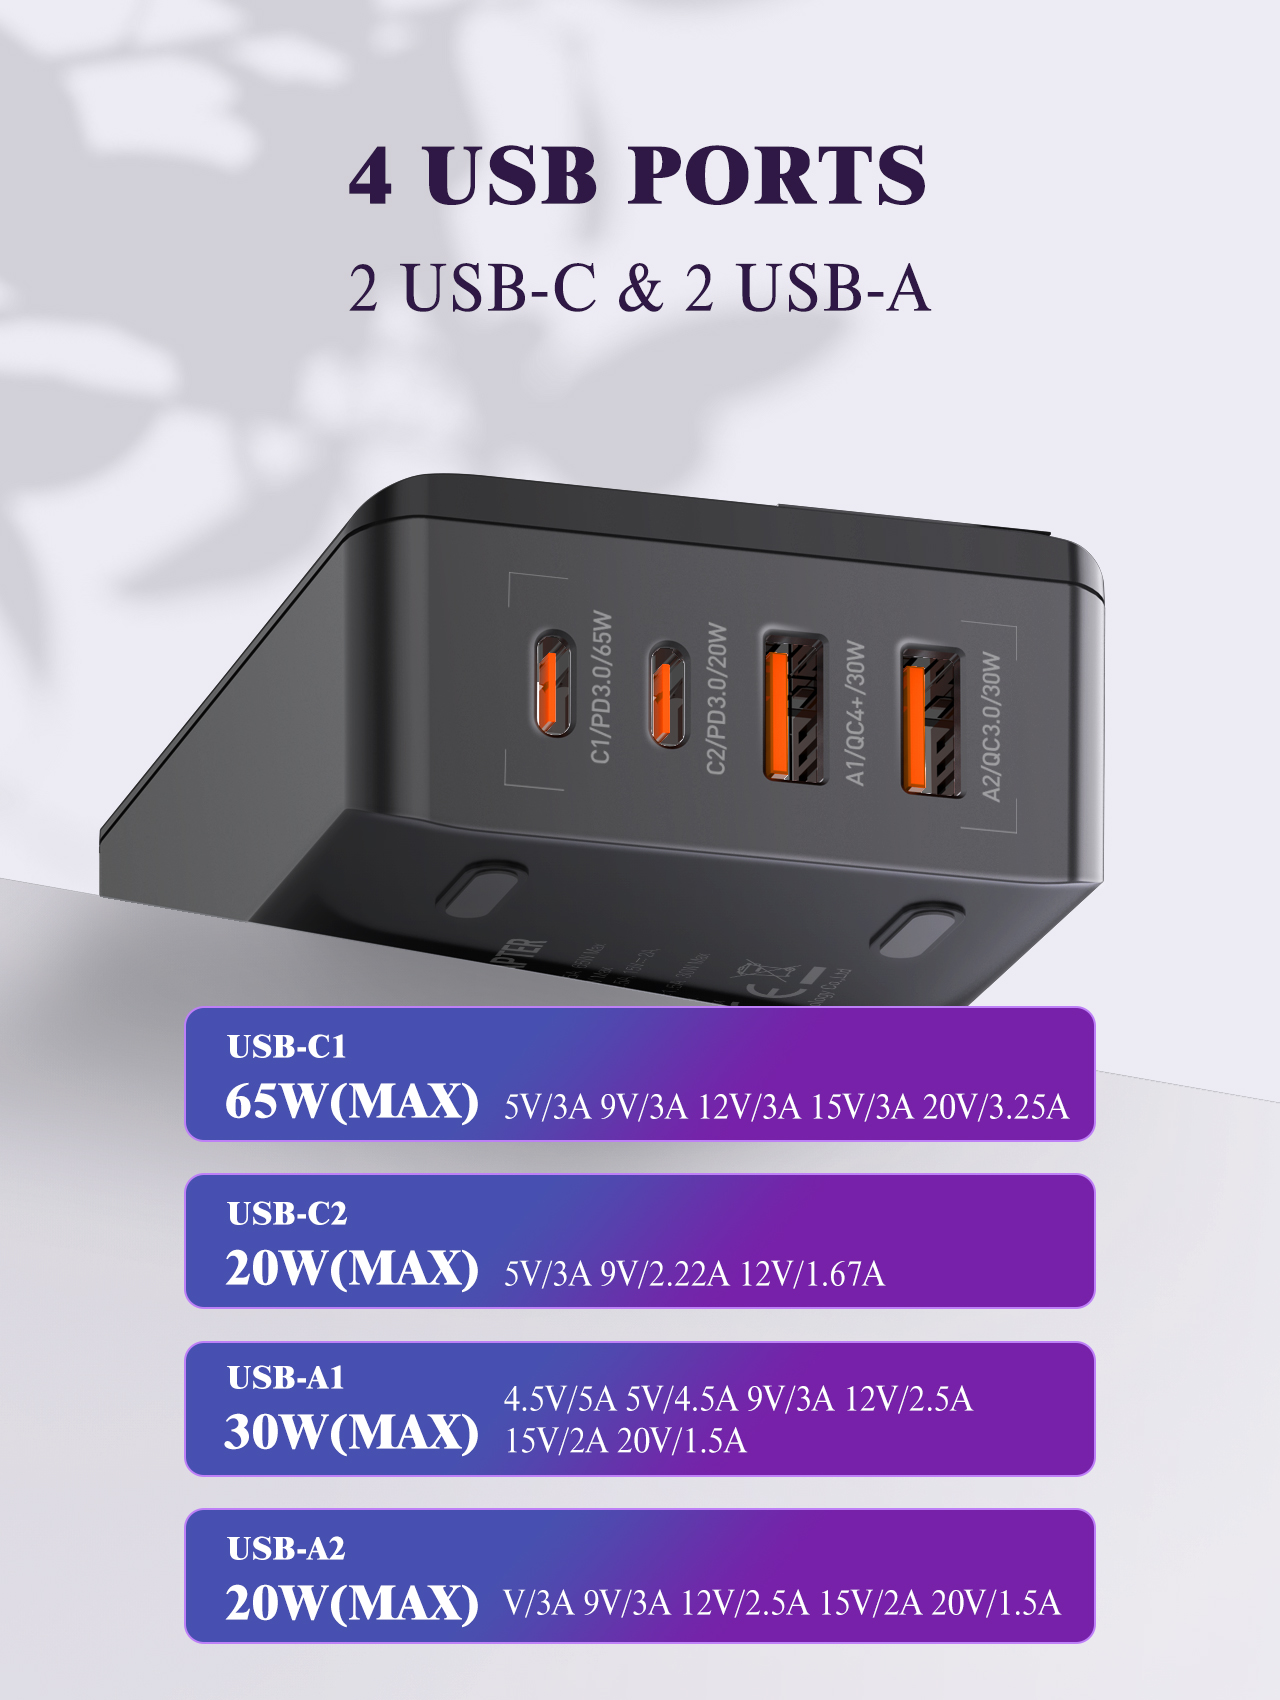 LDNIO 65W 4-Port USB PD Charger USB-C*2 PD3.0 & USB-A *2 QC3.0 Support AFC FCP SCP Fast Charging Wall Charger Adapter EU/US/UK Plug